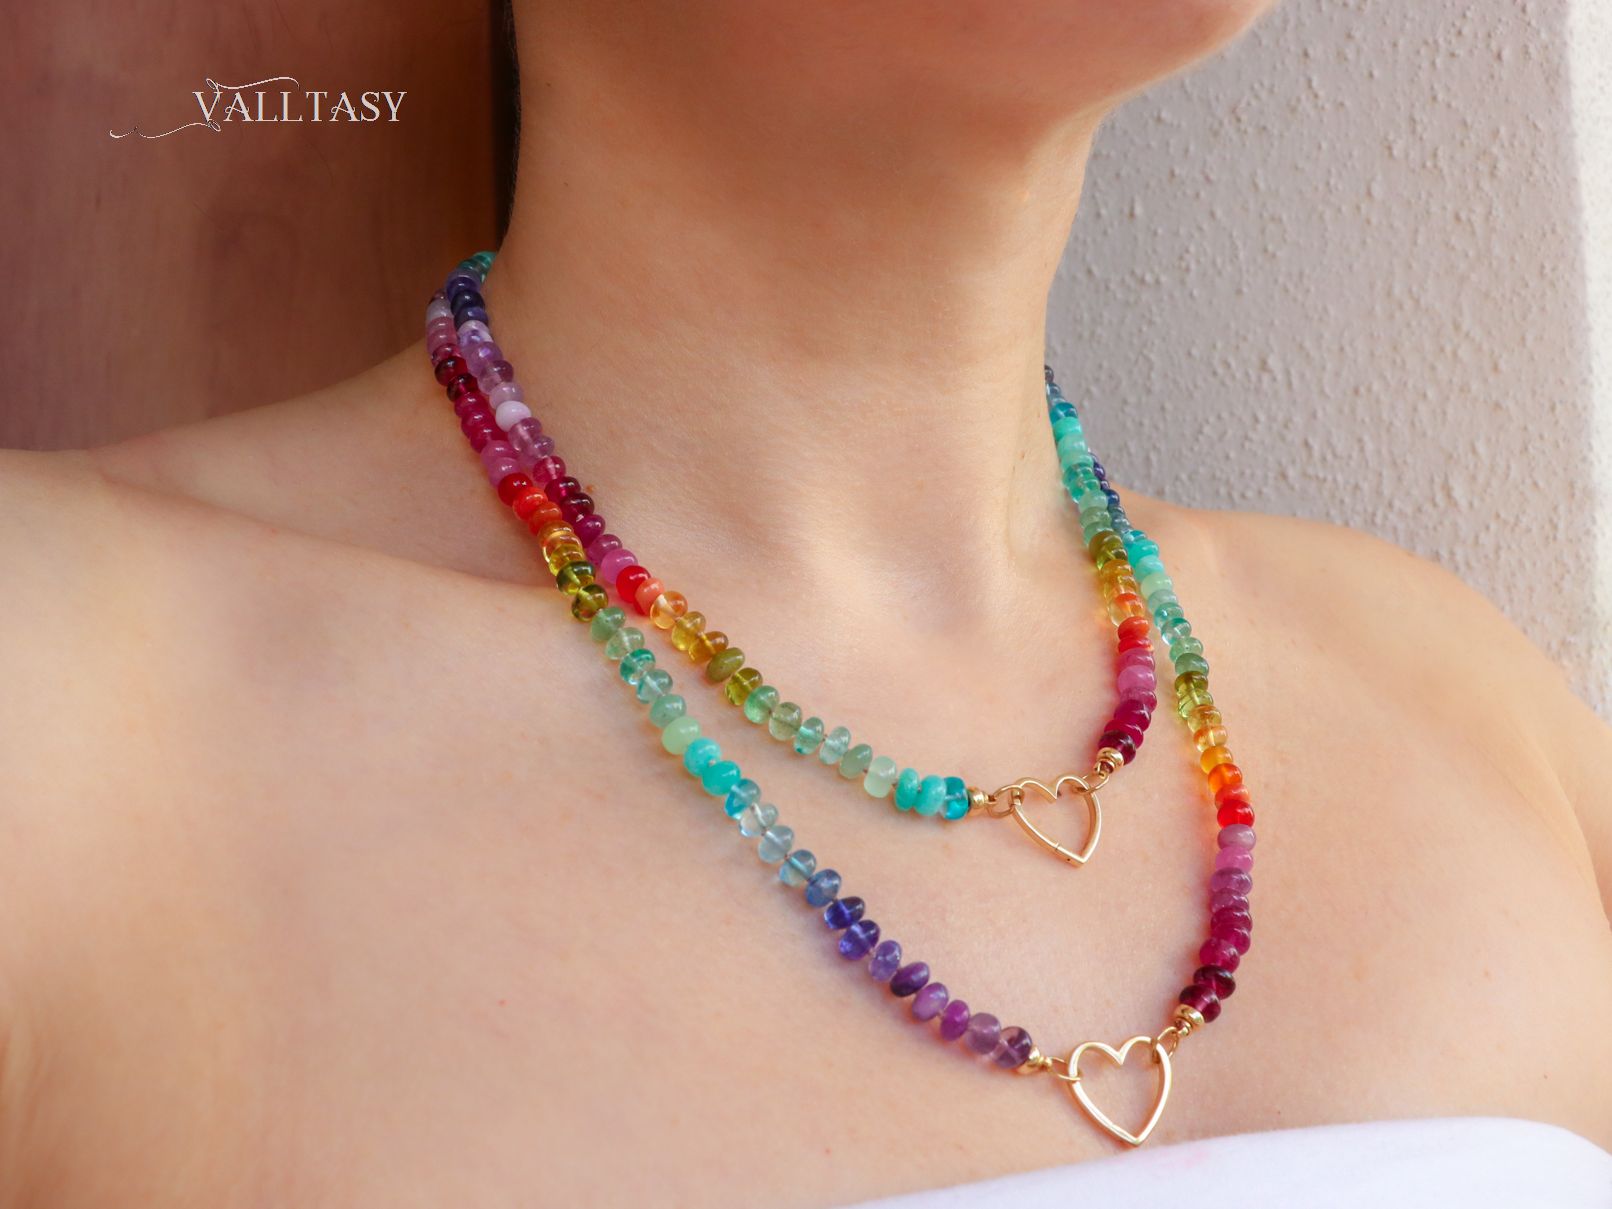 Silk knotted rainbow necklaces.